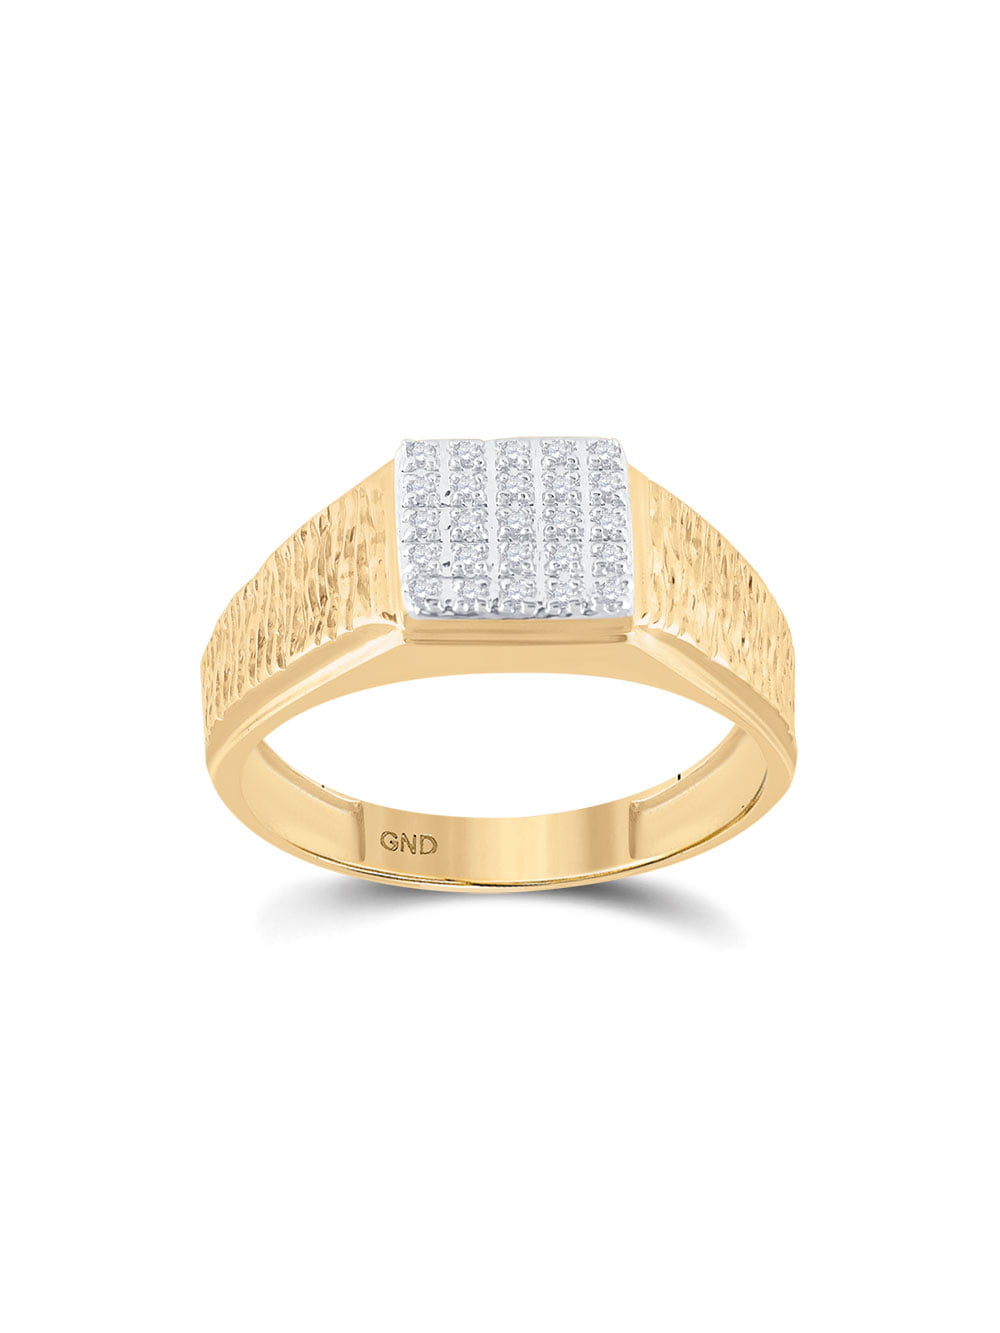 FB Jewels 10K Yellow Gold Mens Round Diamond Square Cluster Wedding Band Ring 1/8 Cttw Size 10 